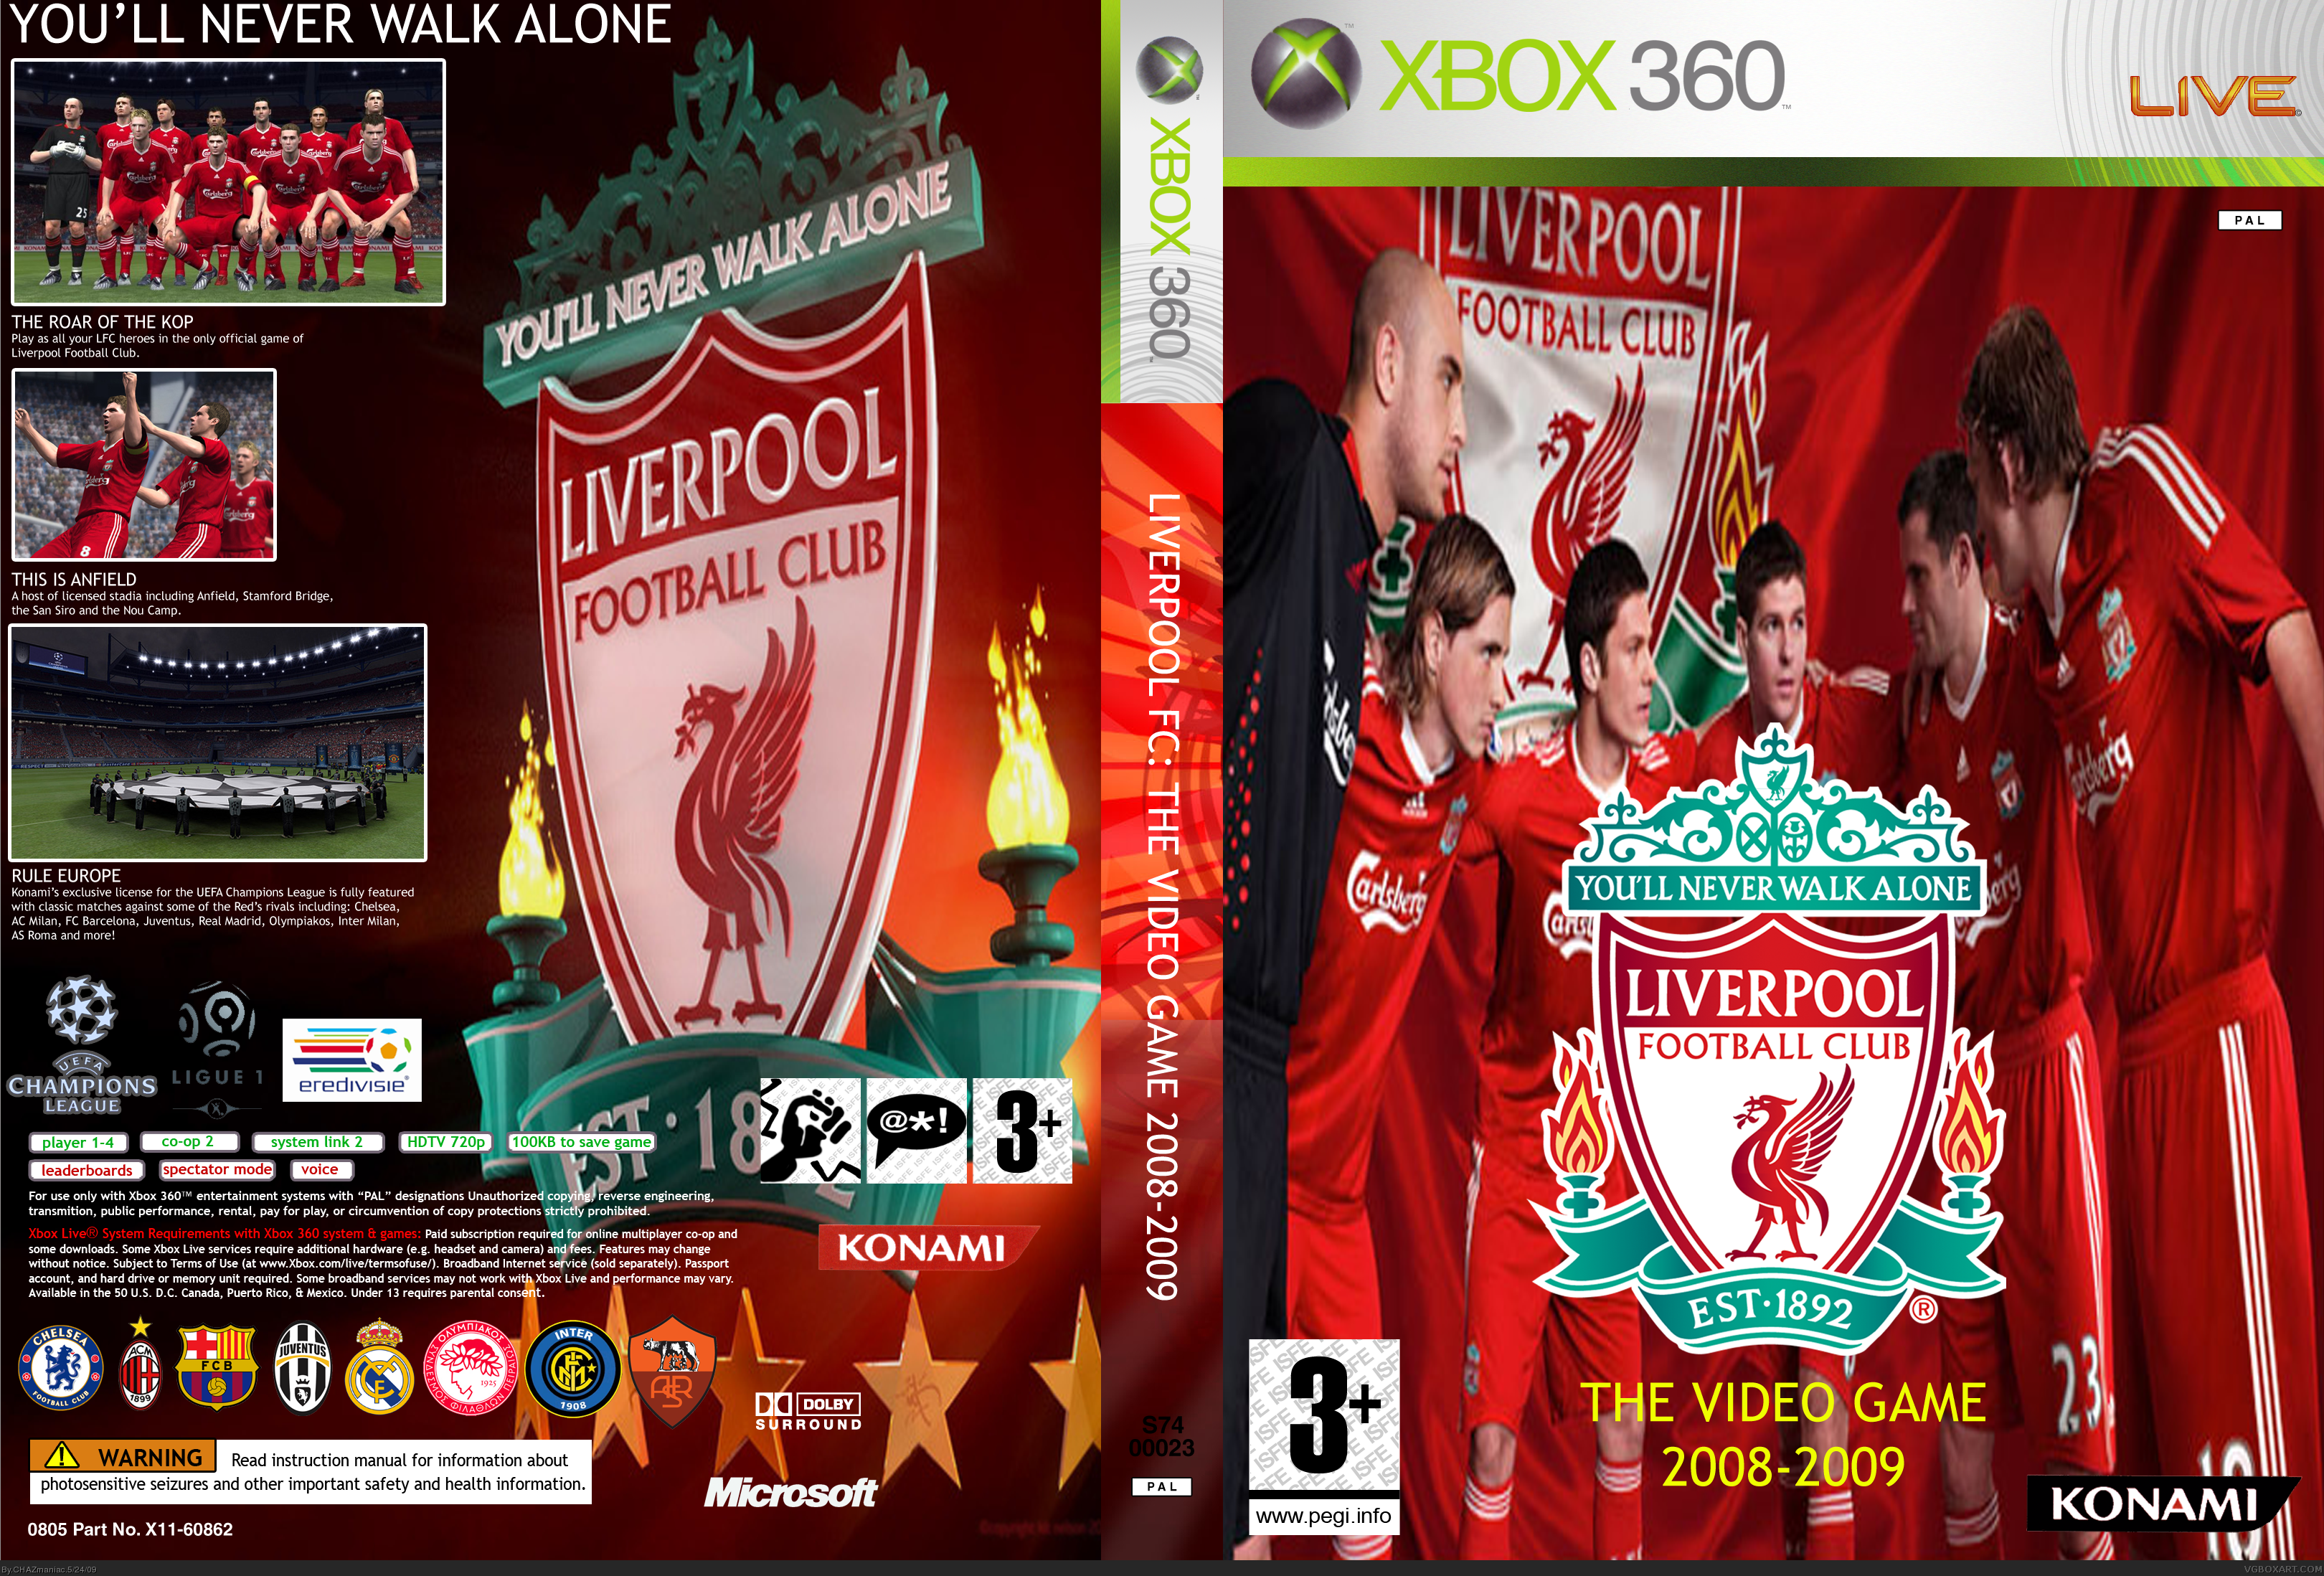 Liverpool FC The Video Game 2008-2009 box cover